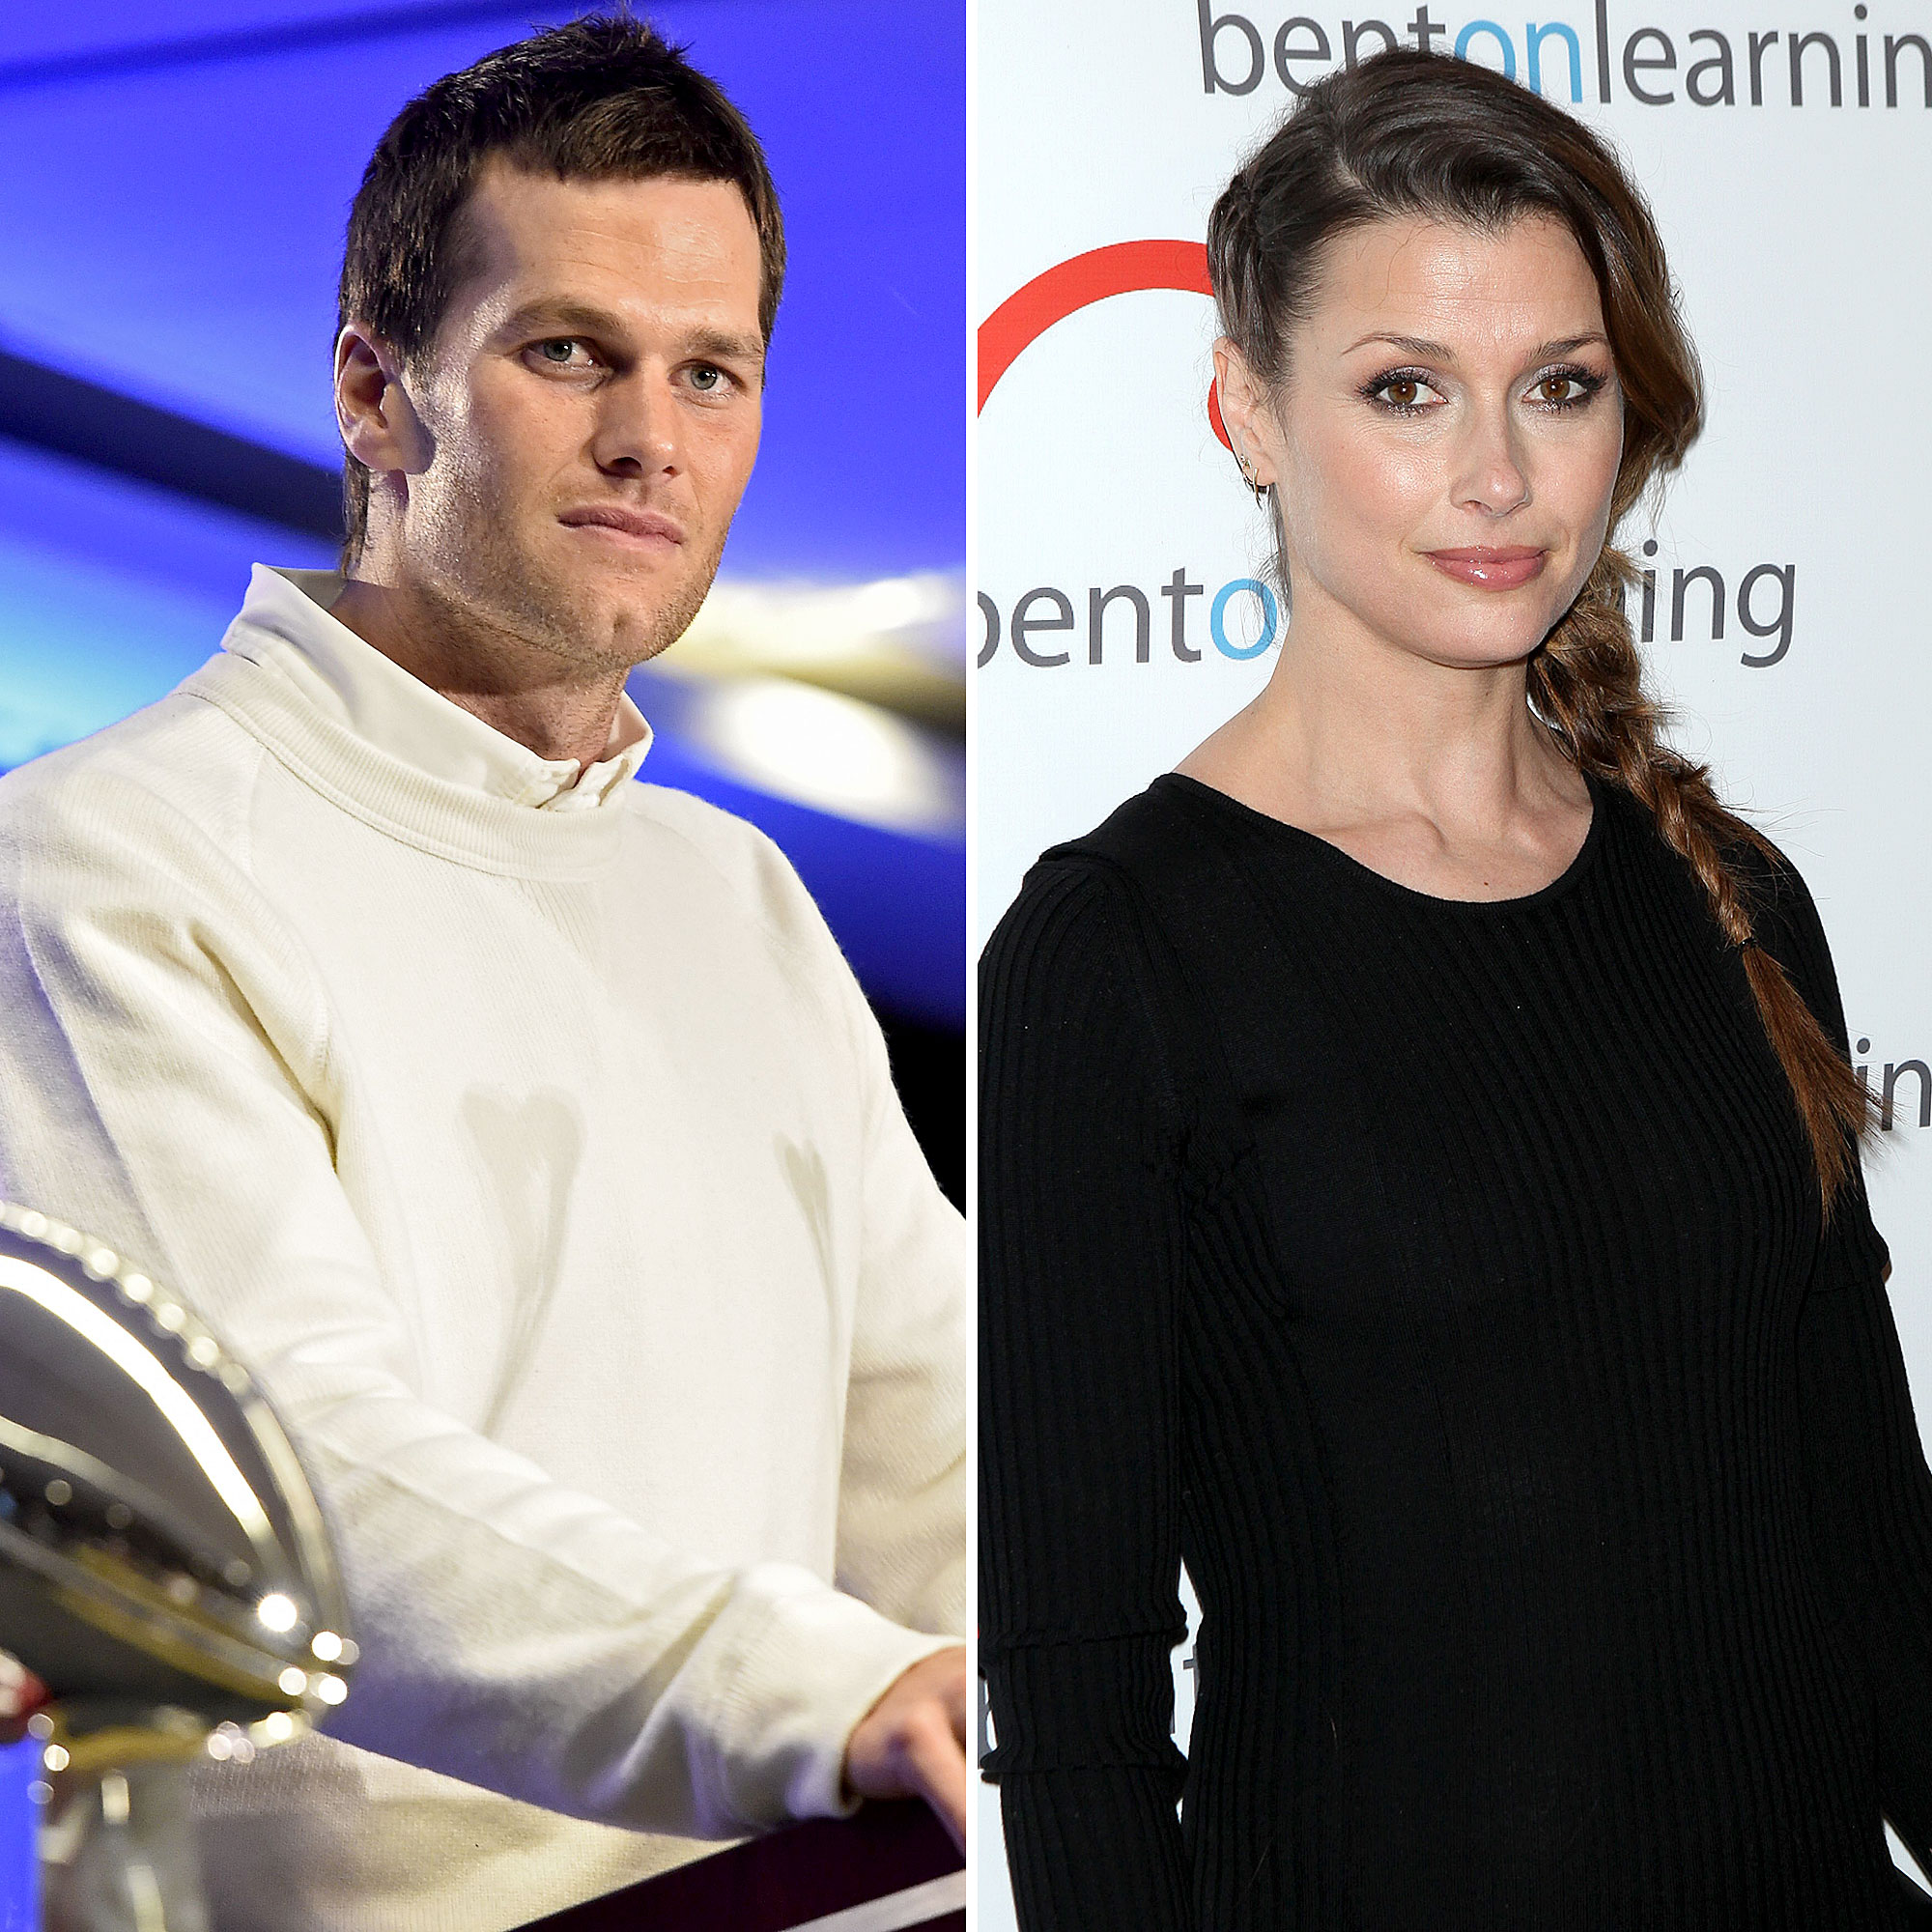 Bridget Moynahans Quotes About Her Relationship With Ex Tom Brady 0940